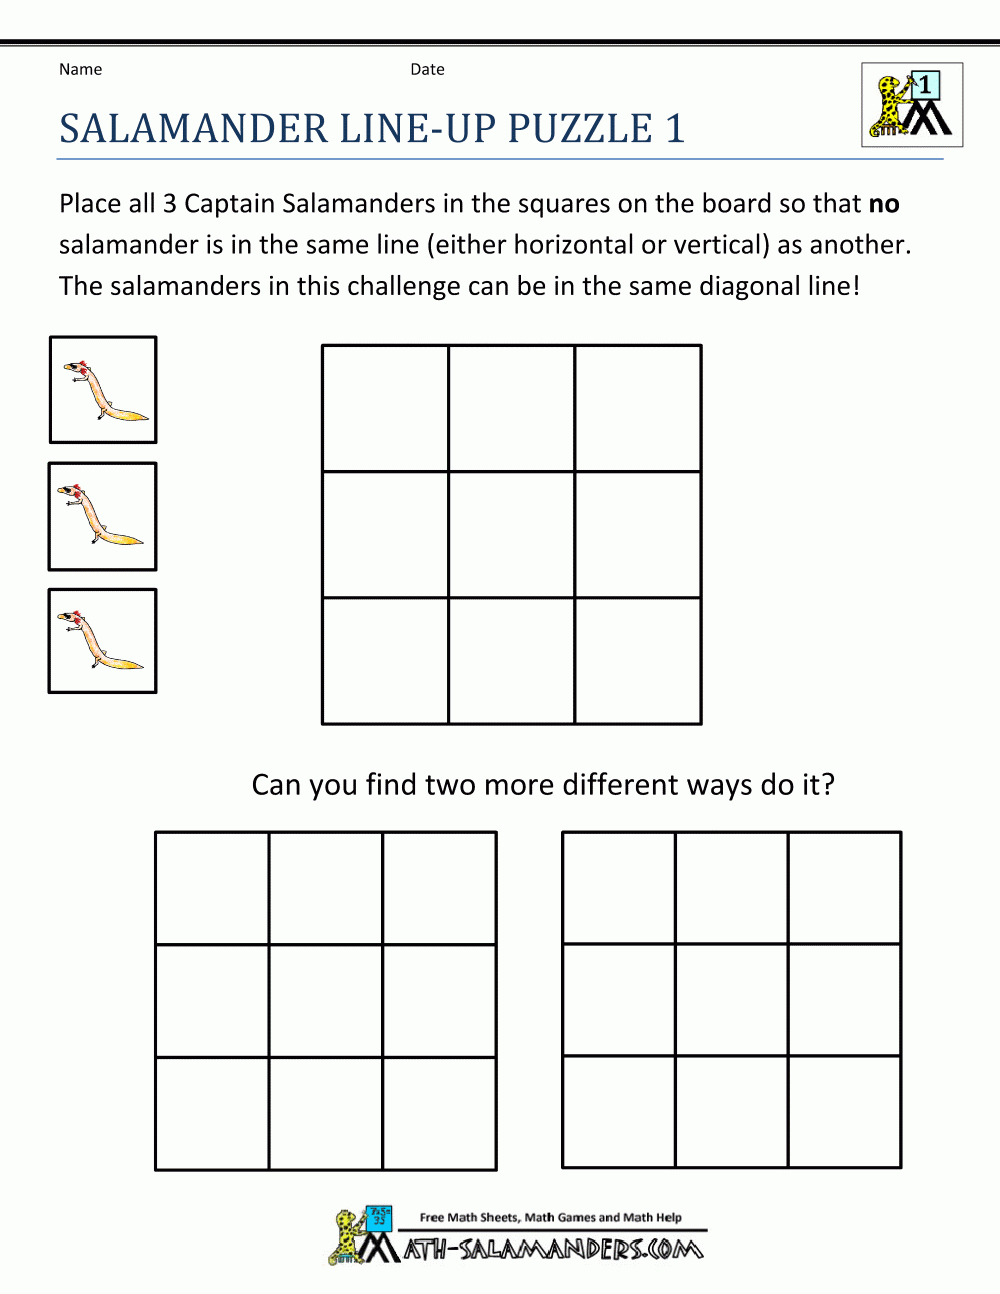 Math Puzzle Worksheets Salamander Line Up Puzzle 1 | Math Games And - Printable Fraction Puzzle